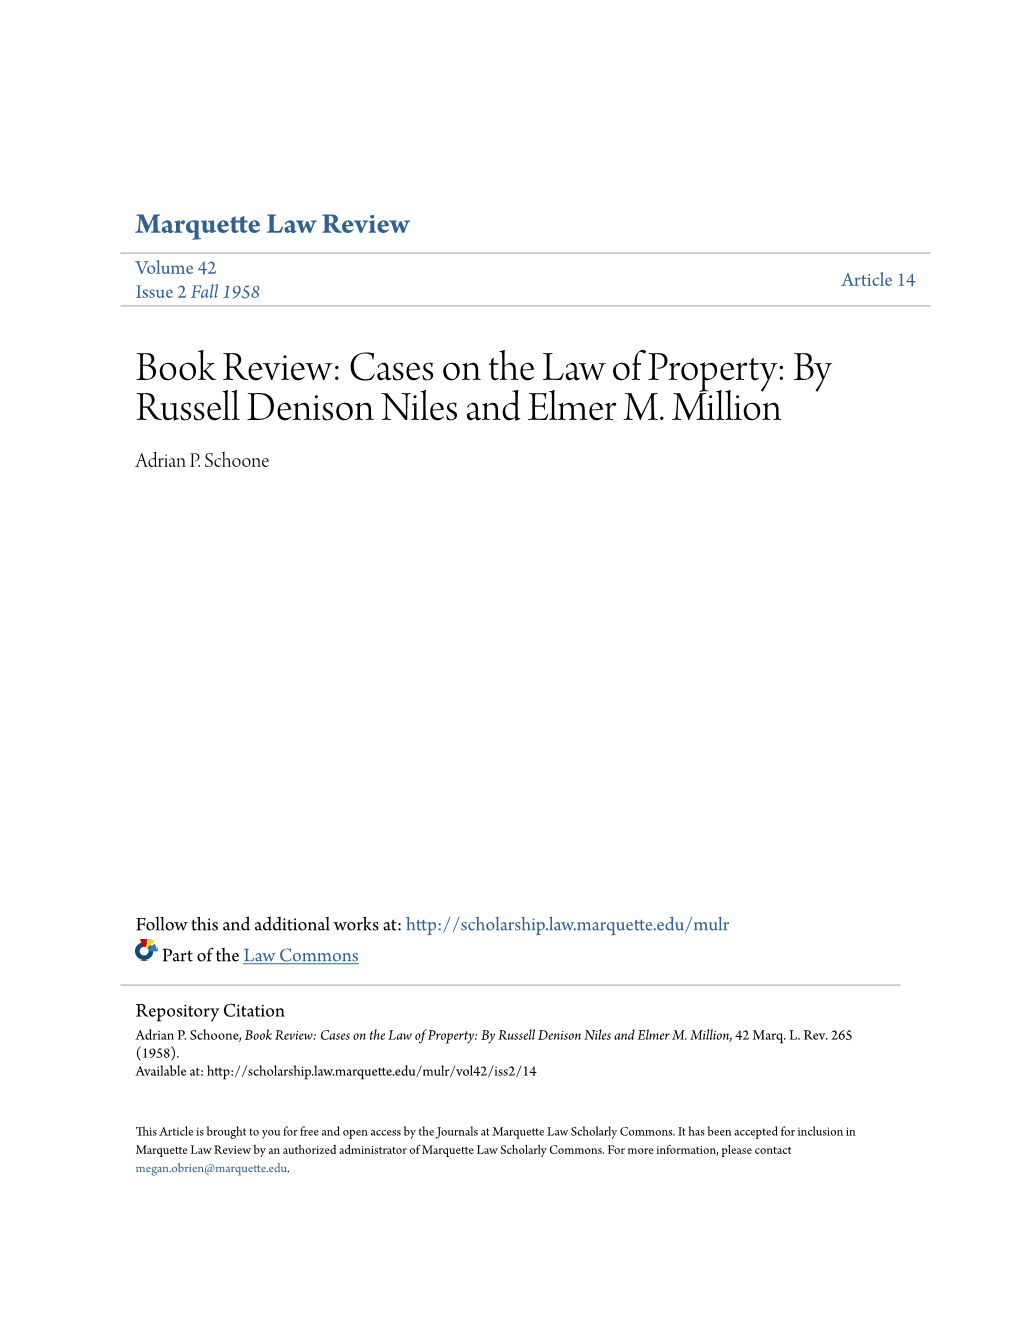 Book Review: Cases on the Law of Property: by Russell Denison Niles and Elmer M